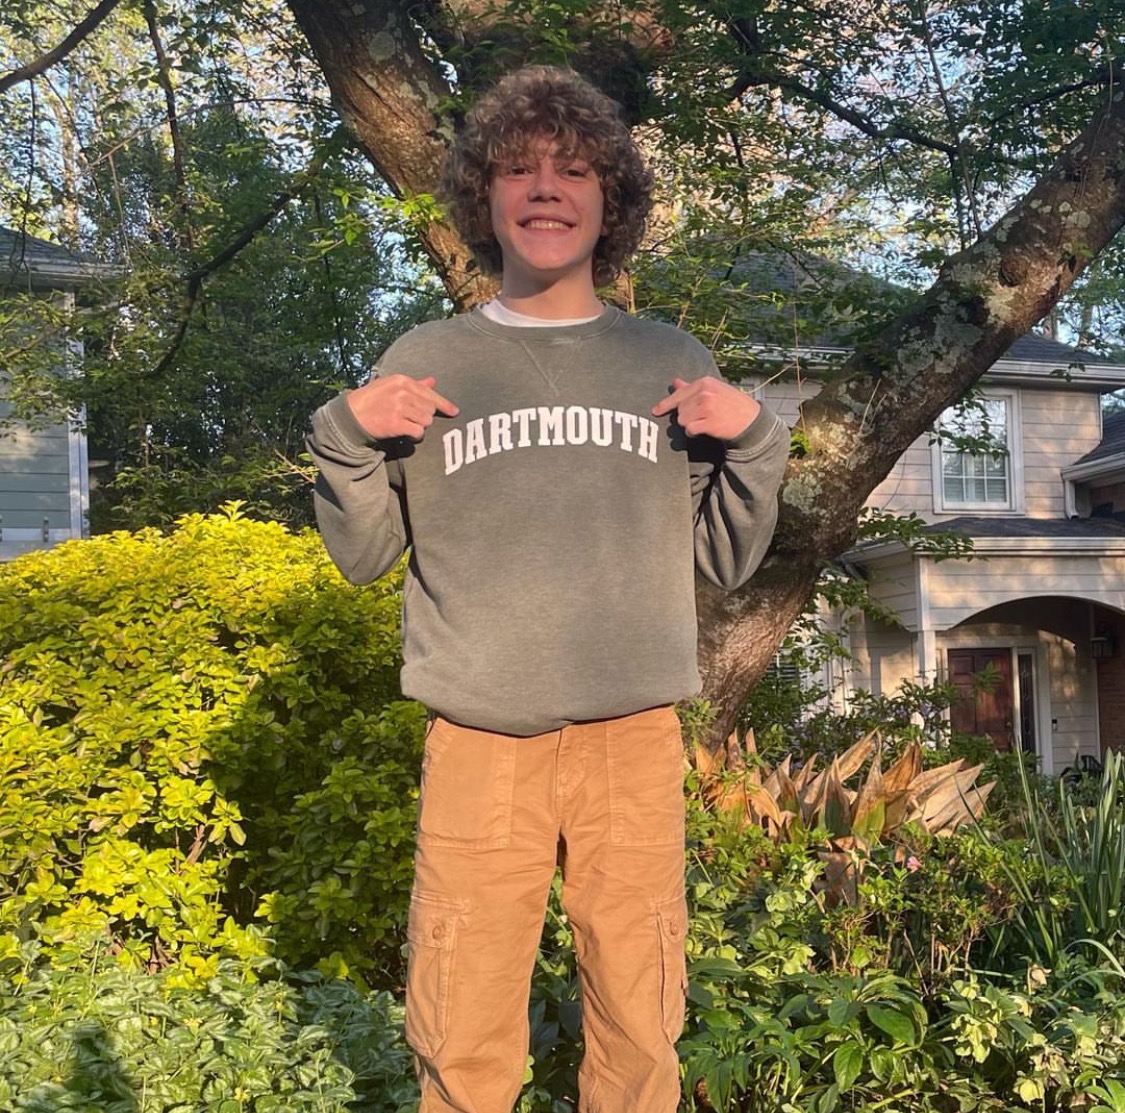 Senior McCoy Lyman committed to Dartmouth University for swim and dive in March of 2023. In his freshman season Lyman was the first ninth grade diver in Midtown history to qualify for the Georgia High School Association Swimming & Diving State Championship. (Courtesy of McCoy Lyman)